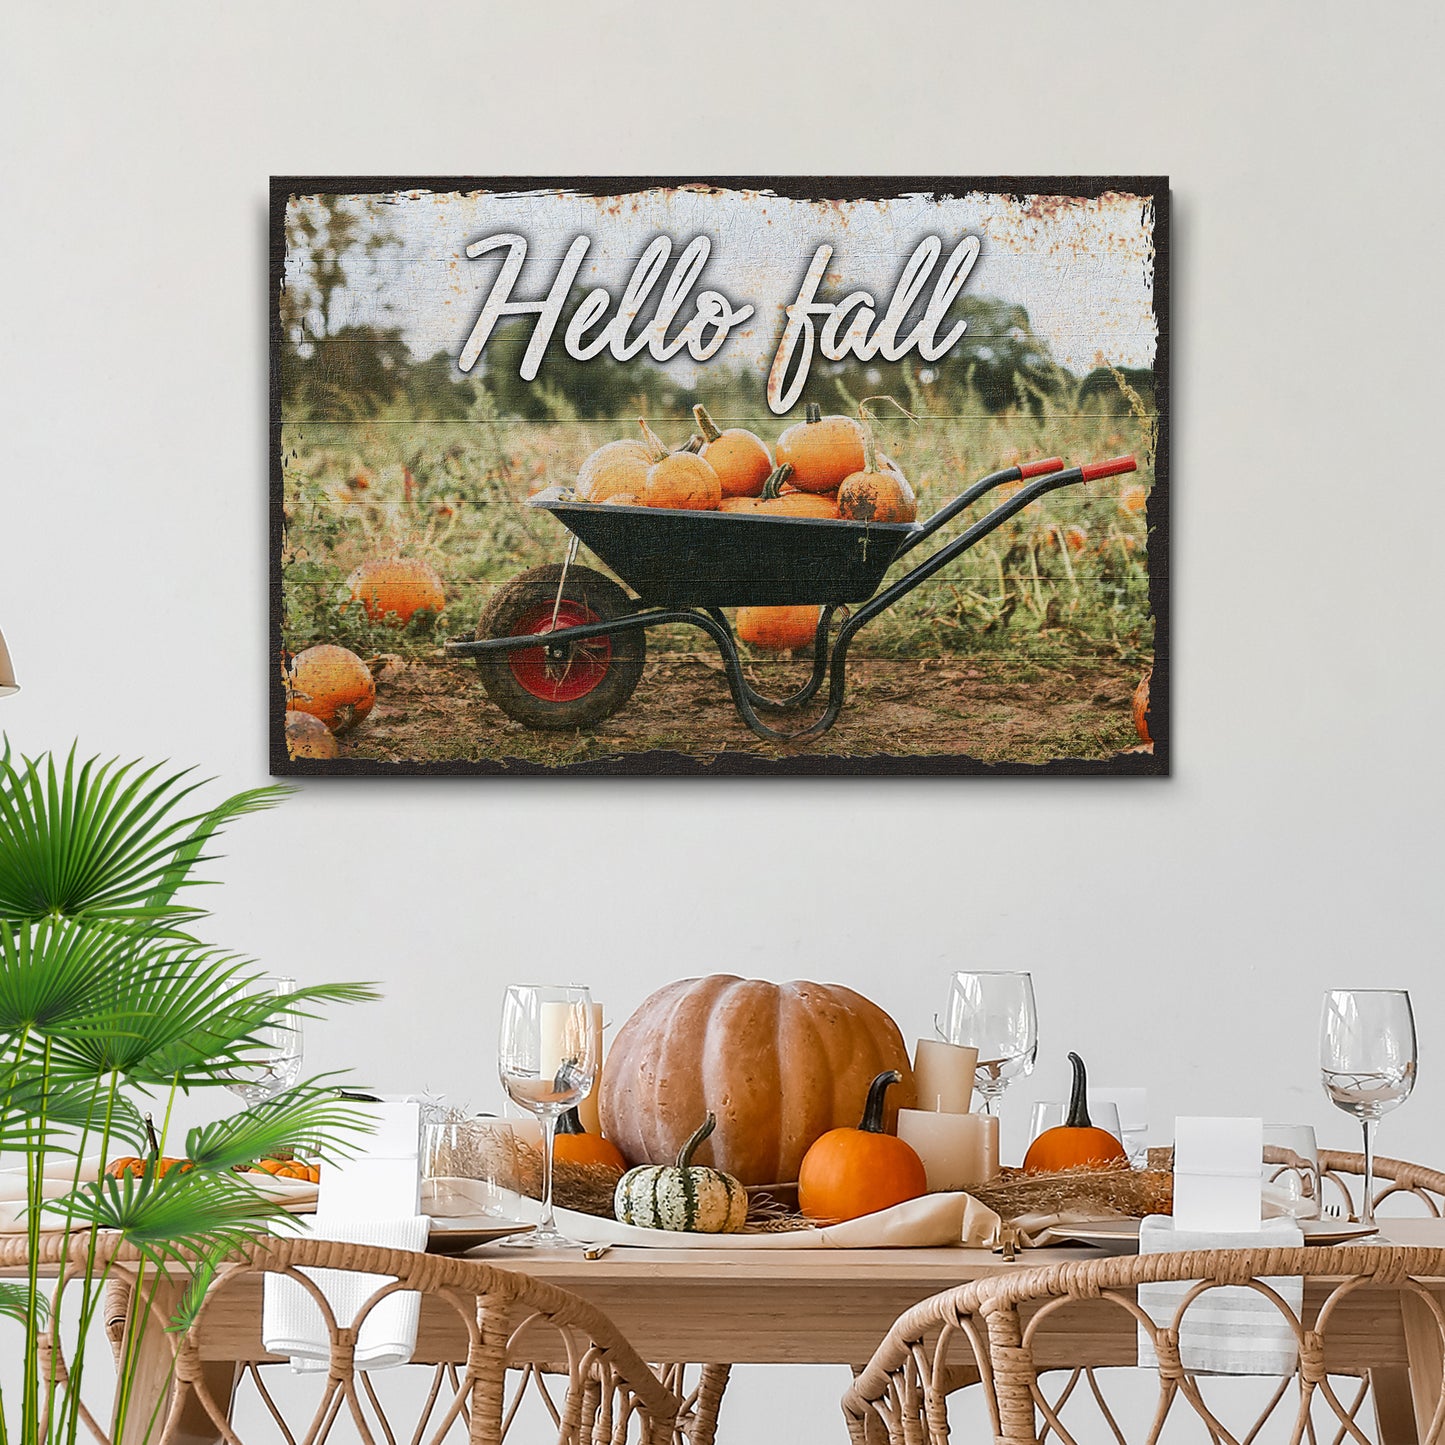 Hello Fall Sign - Image by Tailored Canvases